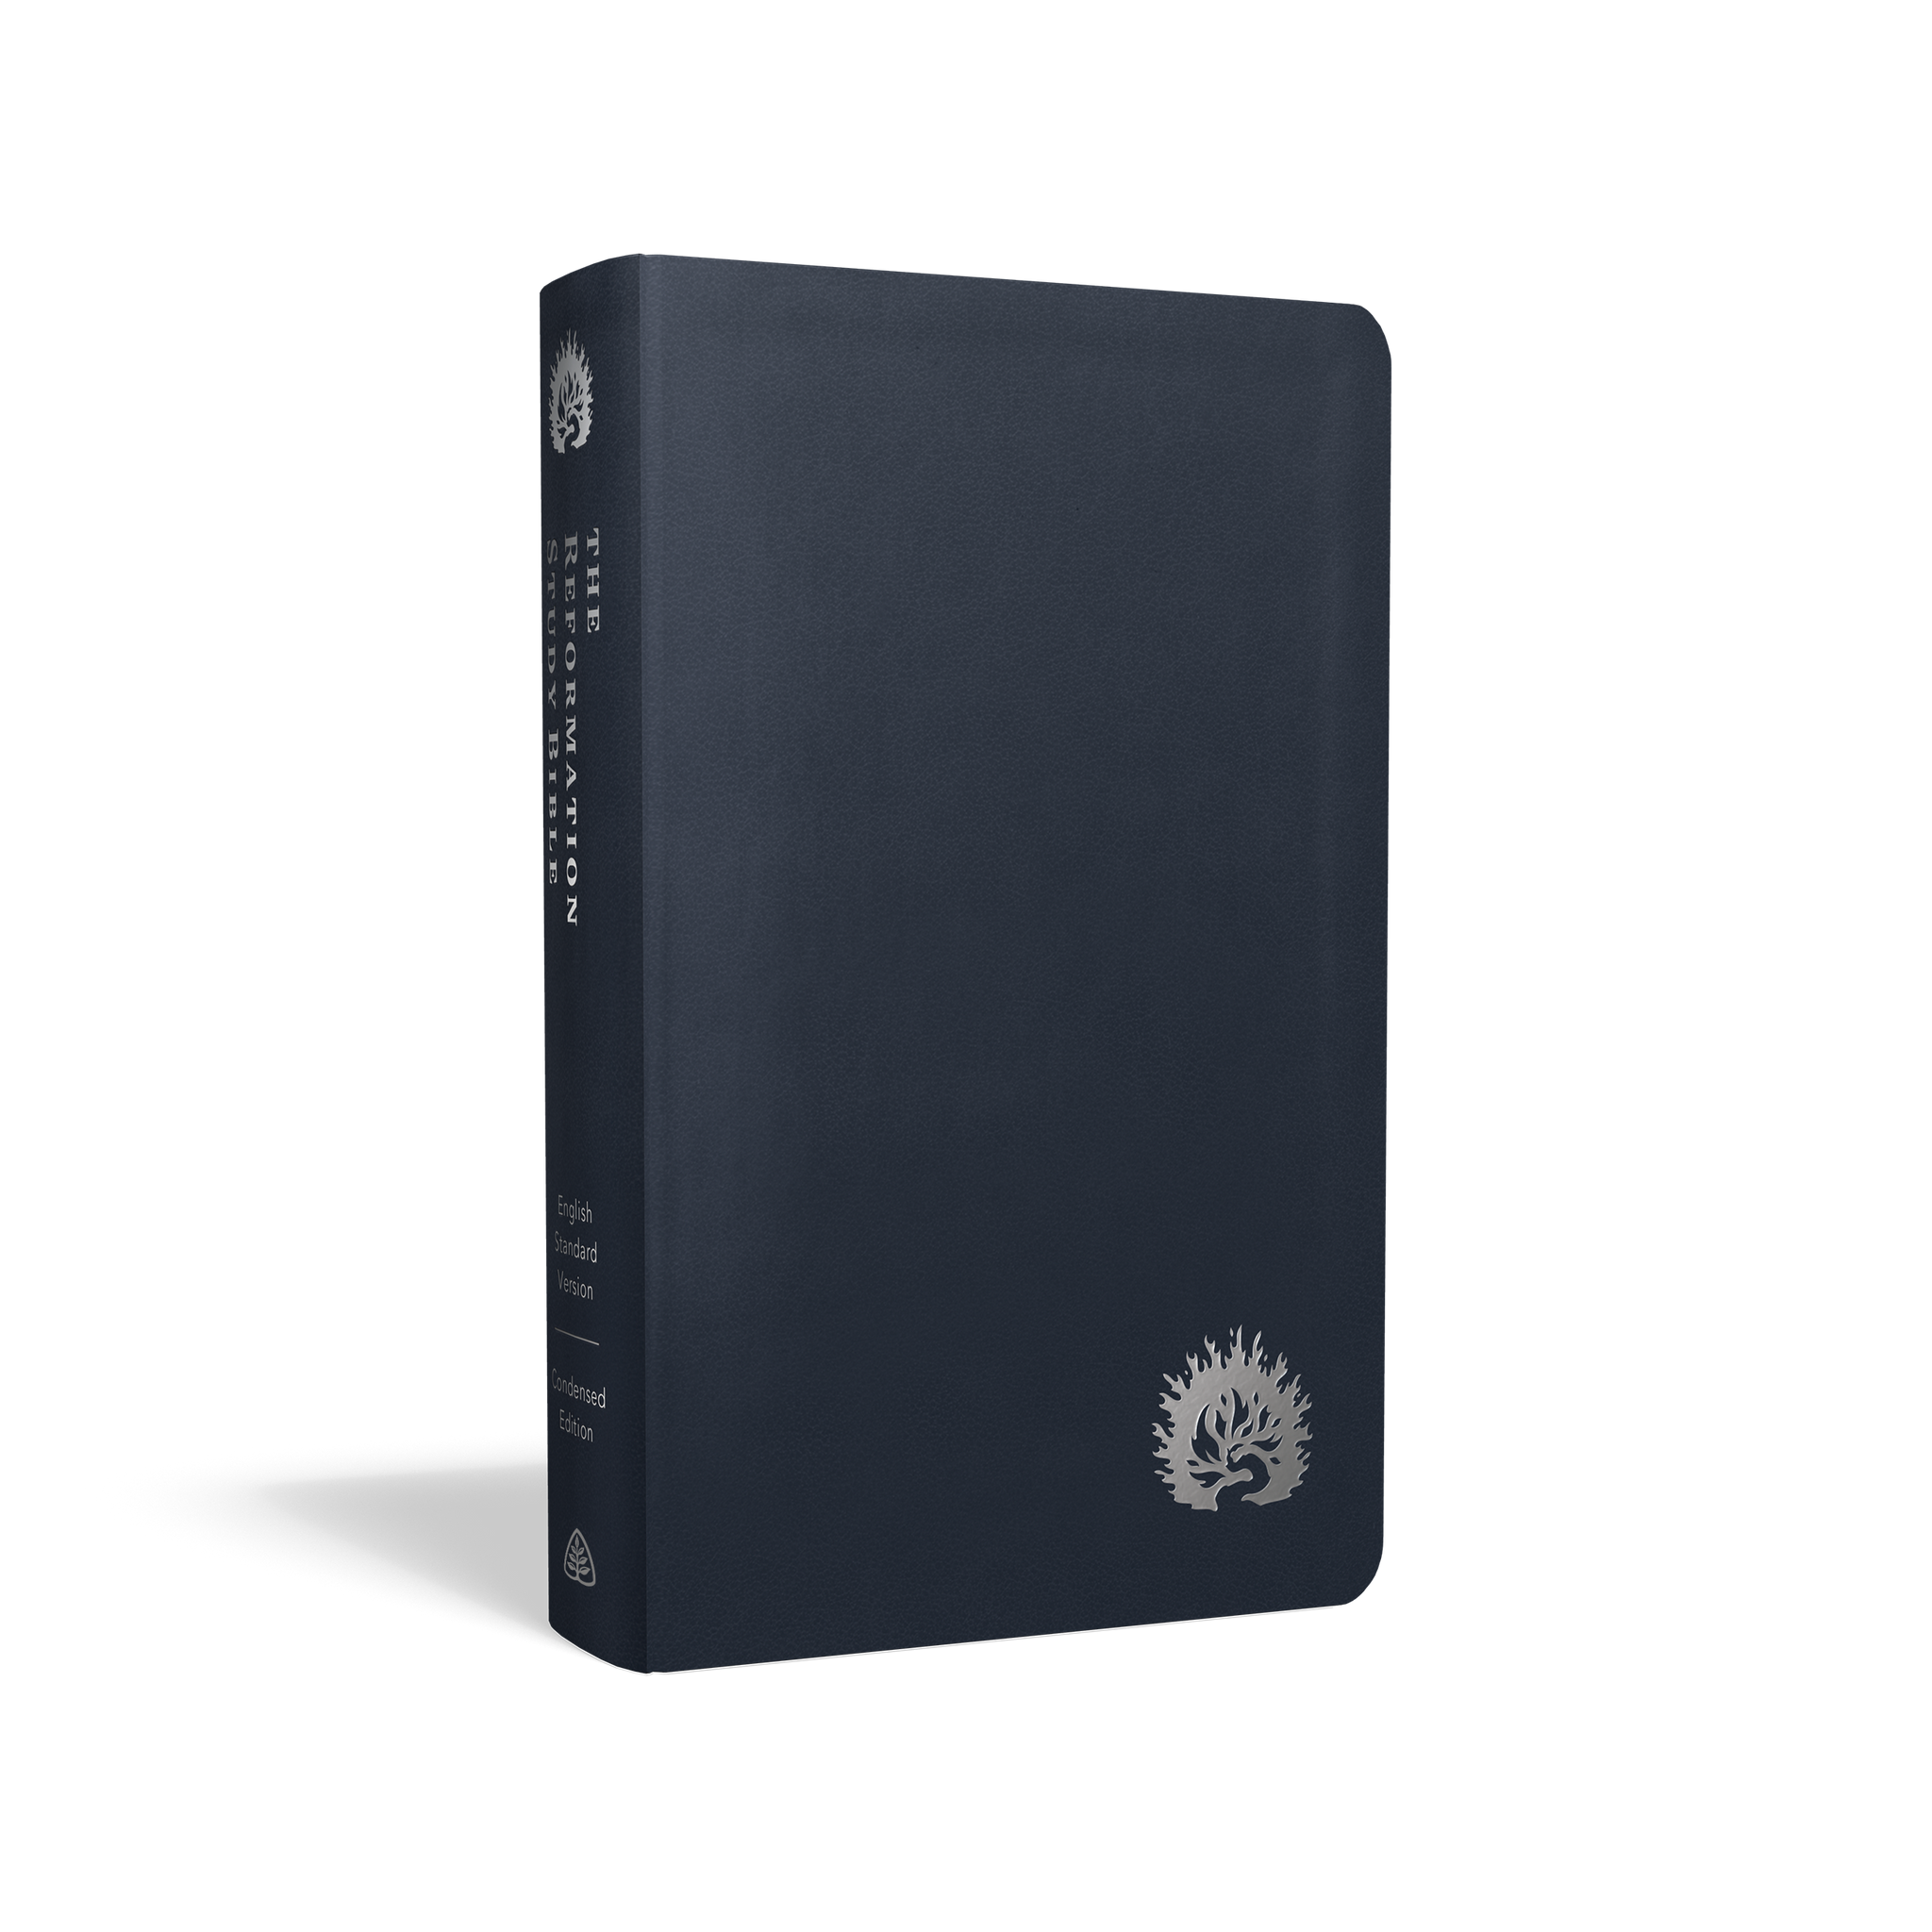 ESV Reformation Study Bible, Condensed Edition (Leather-like, Gift Edition, Navy)